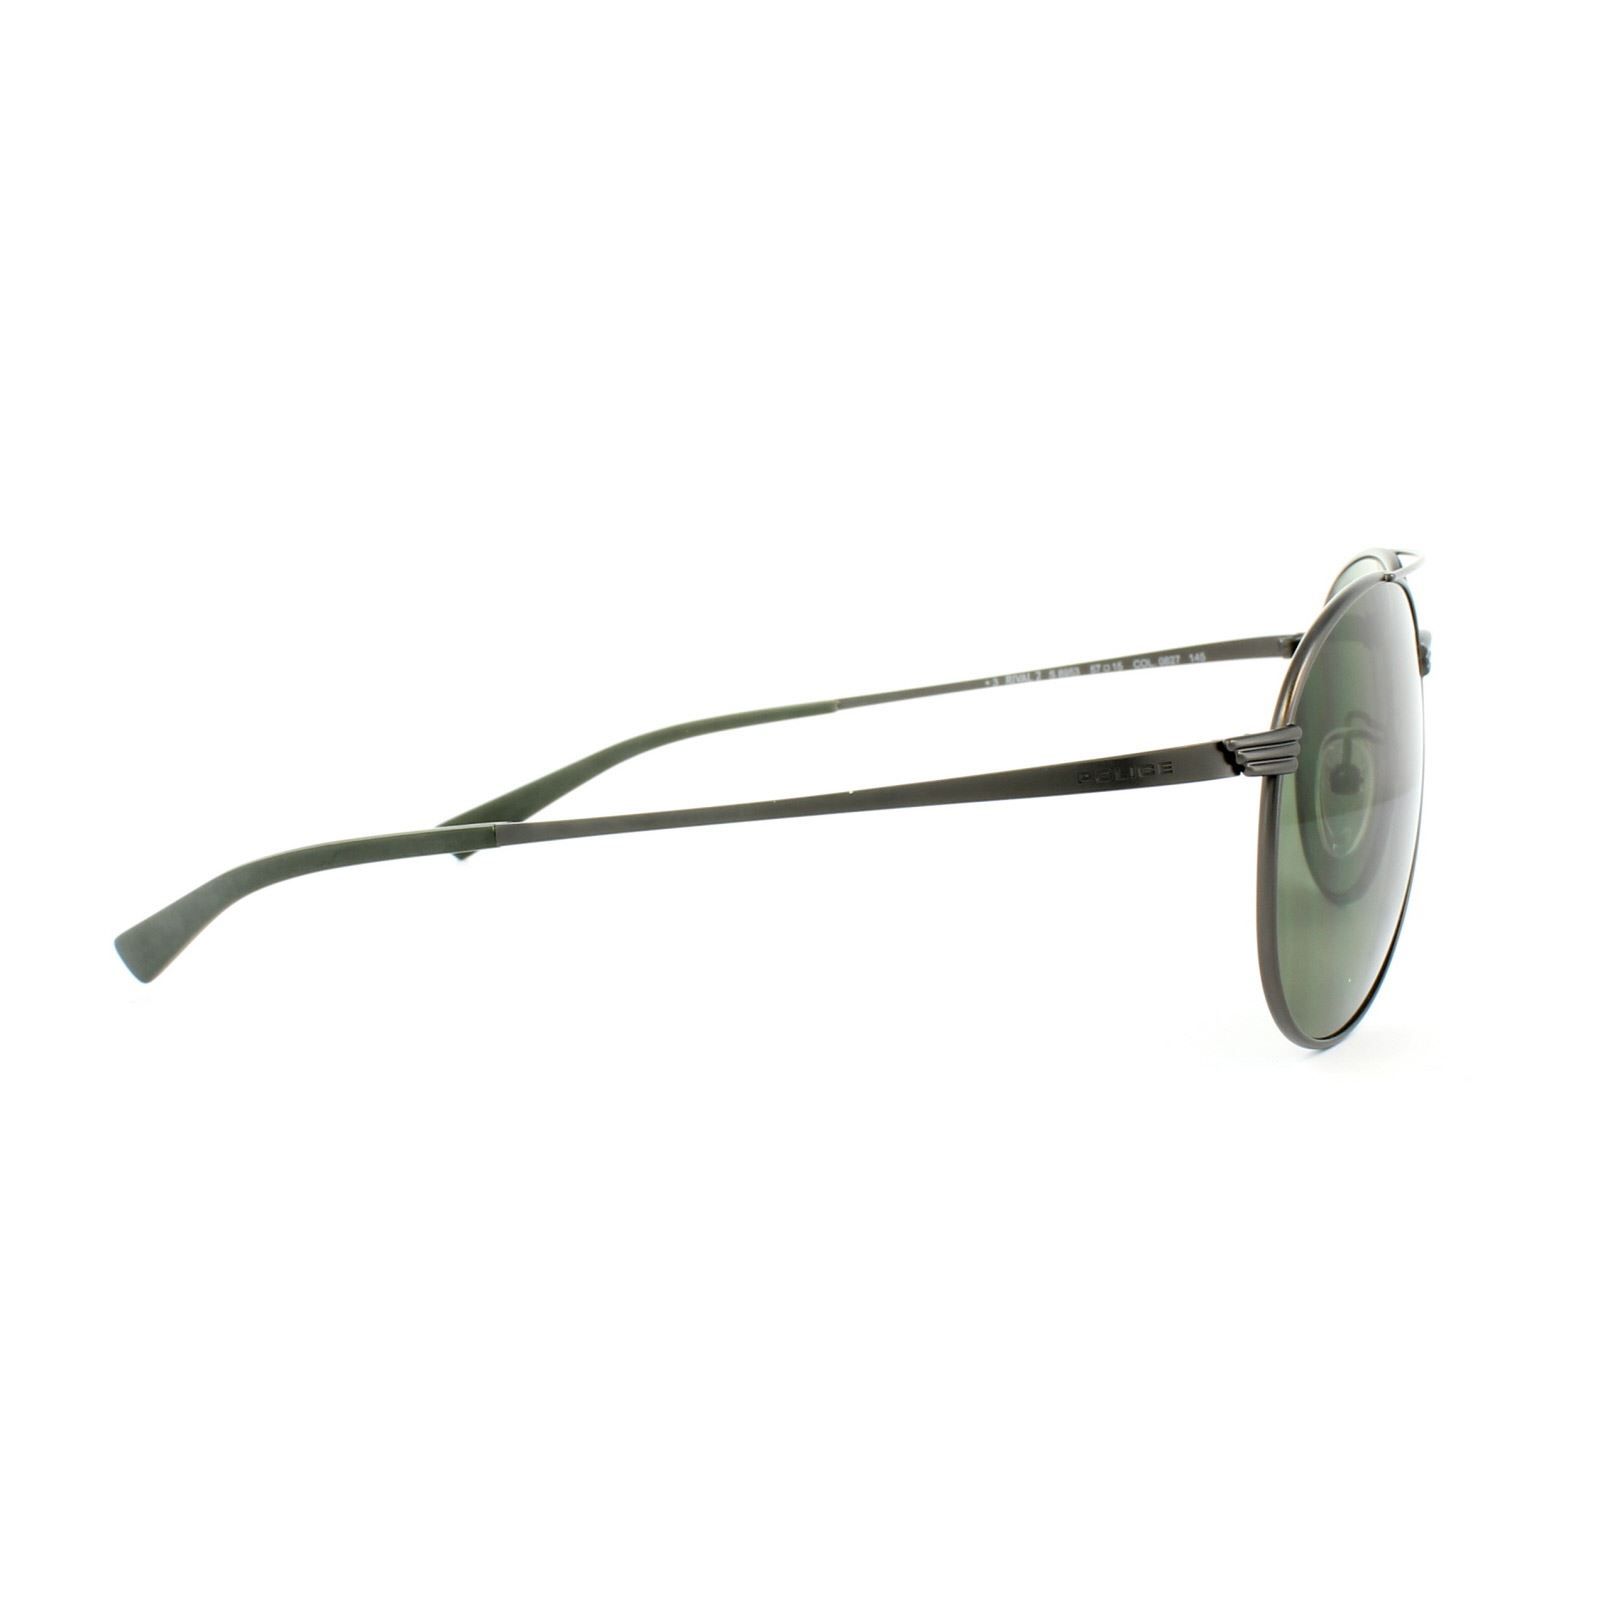 Police Sunglasses S8953 Rival 2 0627 Gunmetal Green are a slimmed down aviator style with a really round aviator lens from Police with cool grooved bride and temple detailing and prominent top brow bar. The frame is really lightweight and the adjustable nose pads will help make it fit and feel as comfortable as possible.